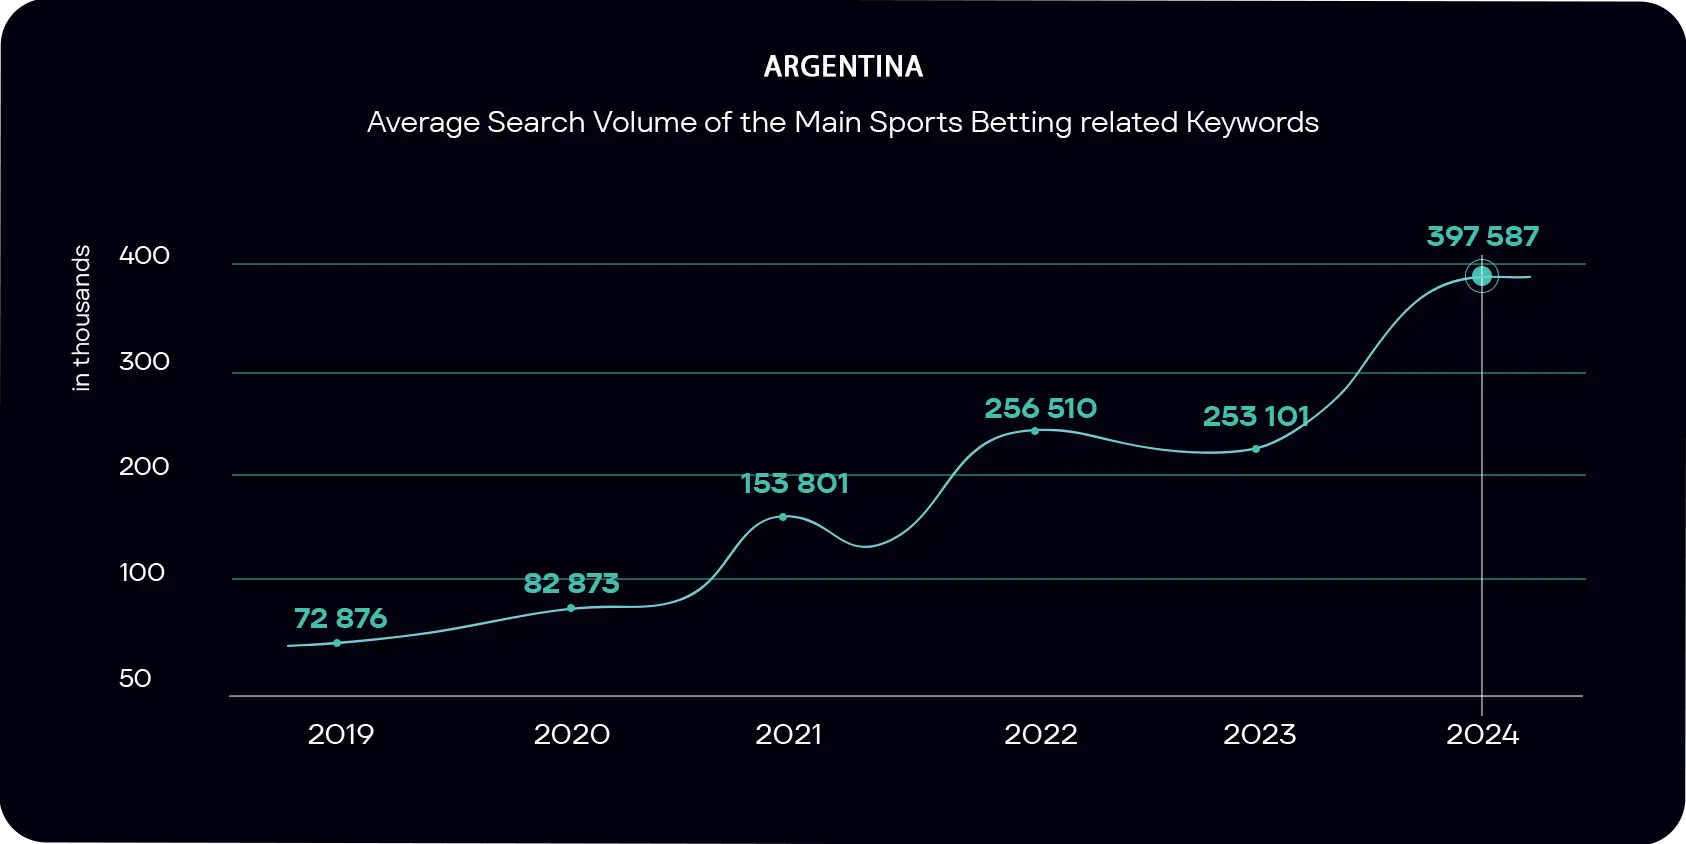 How many people search for sports betting related keywords in Argentina